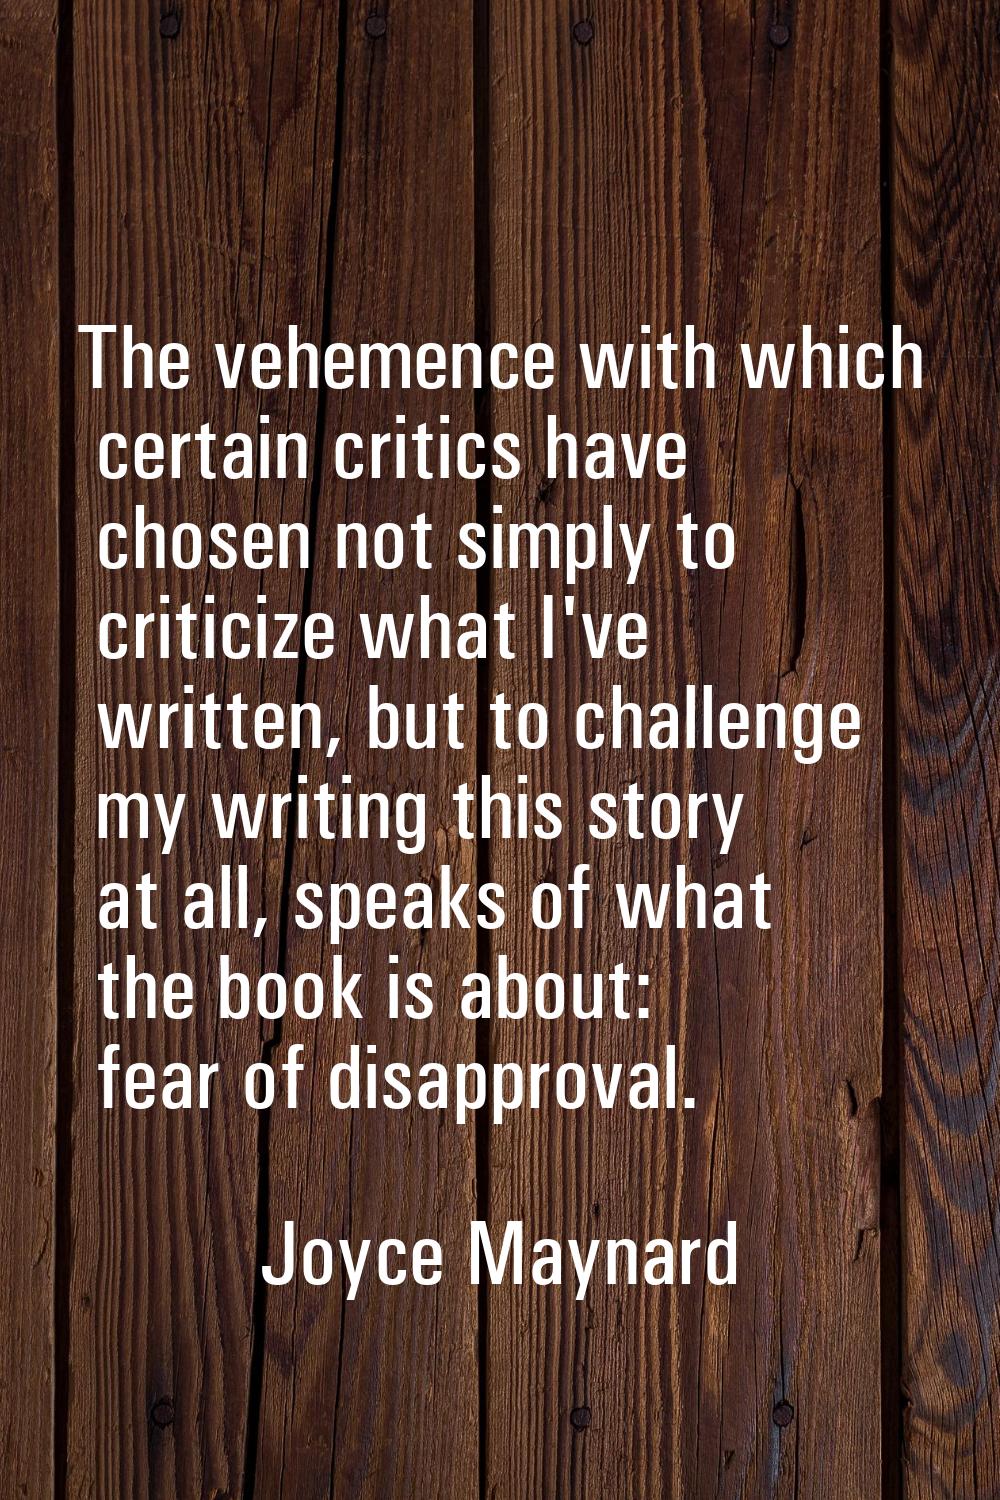 The vehemence with which certain critics have chosen not simply to criticize what I've written, but